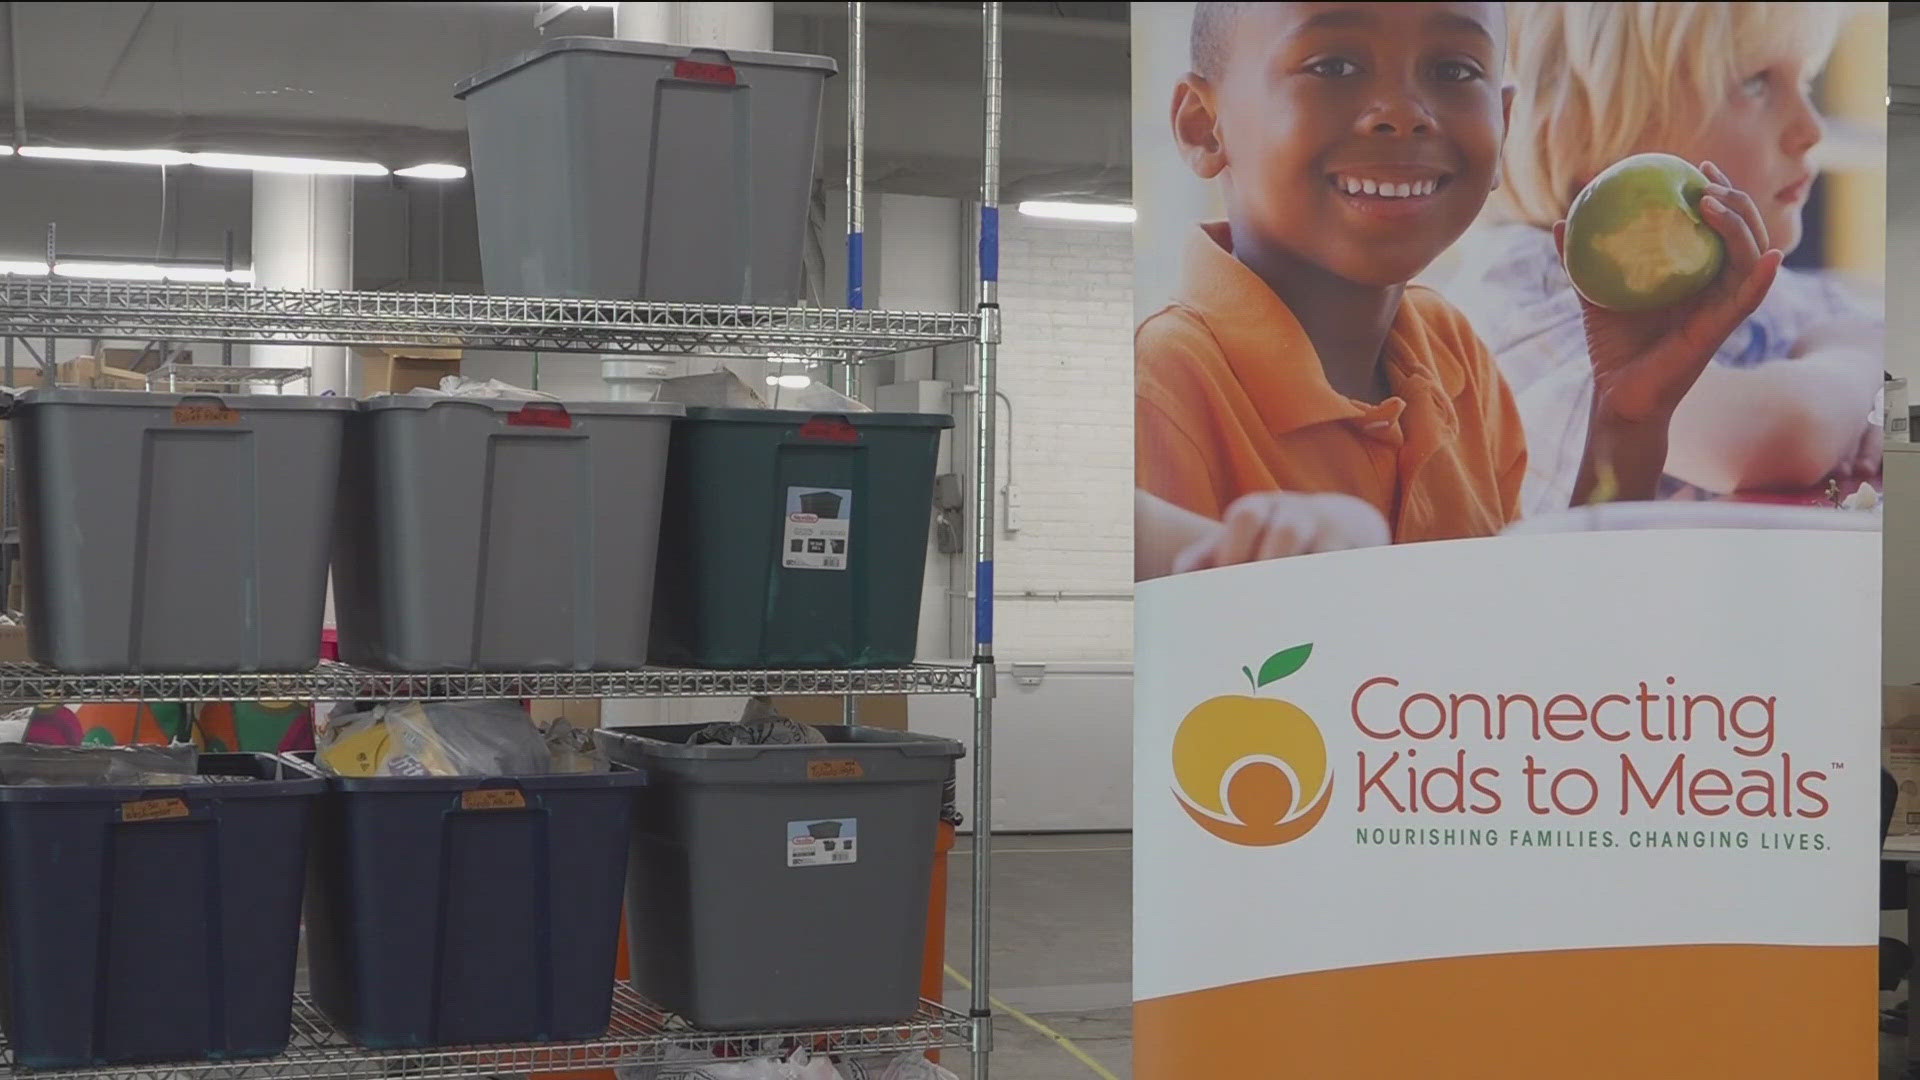 Connecting Kids to Meals works year-round to address food insecurity in the community, especially during summer when children no longer have access to school lunches